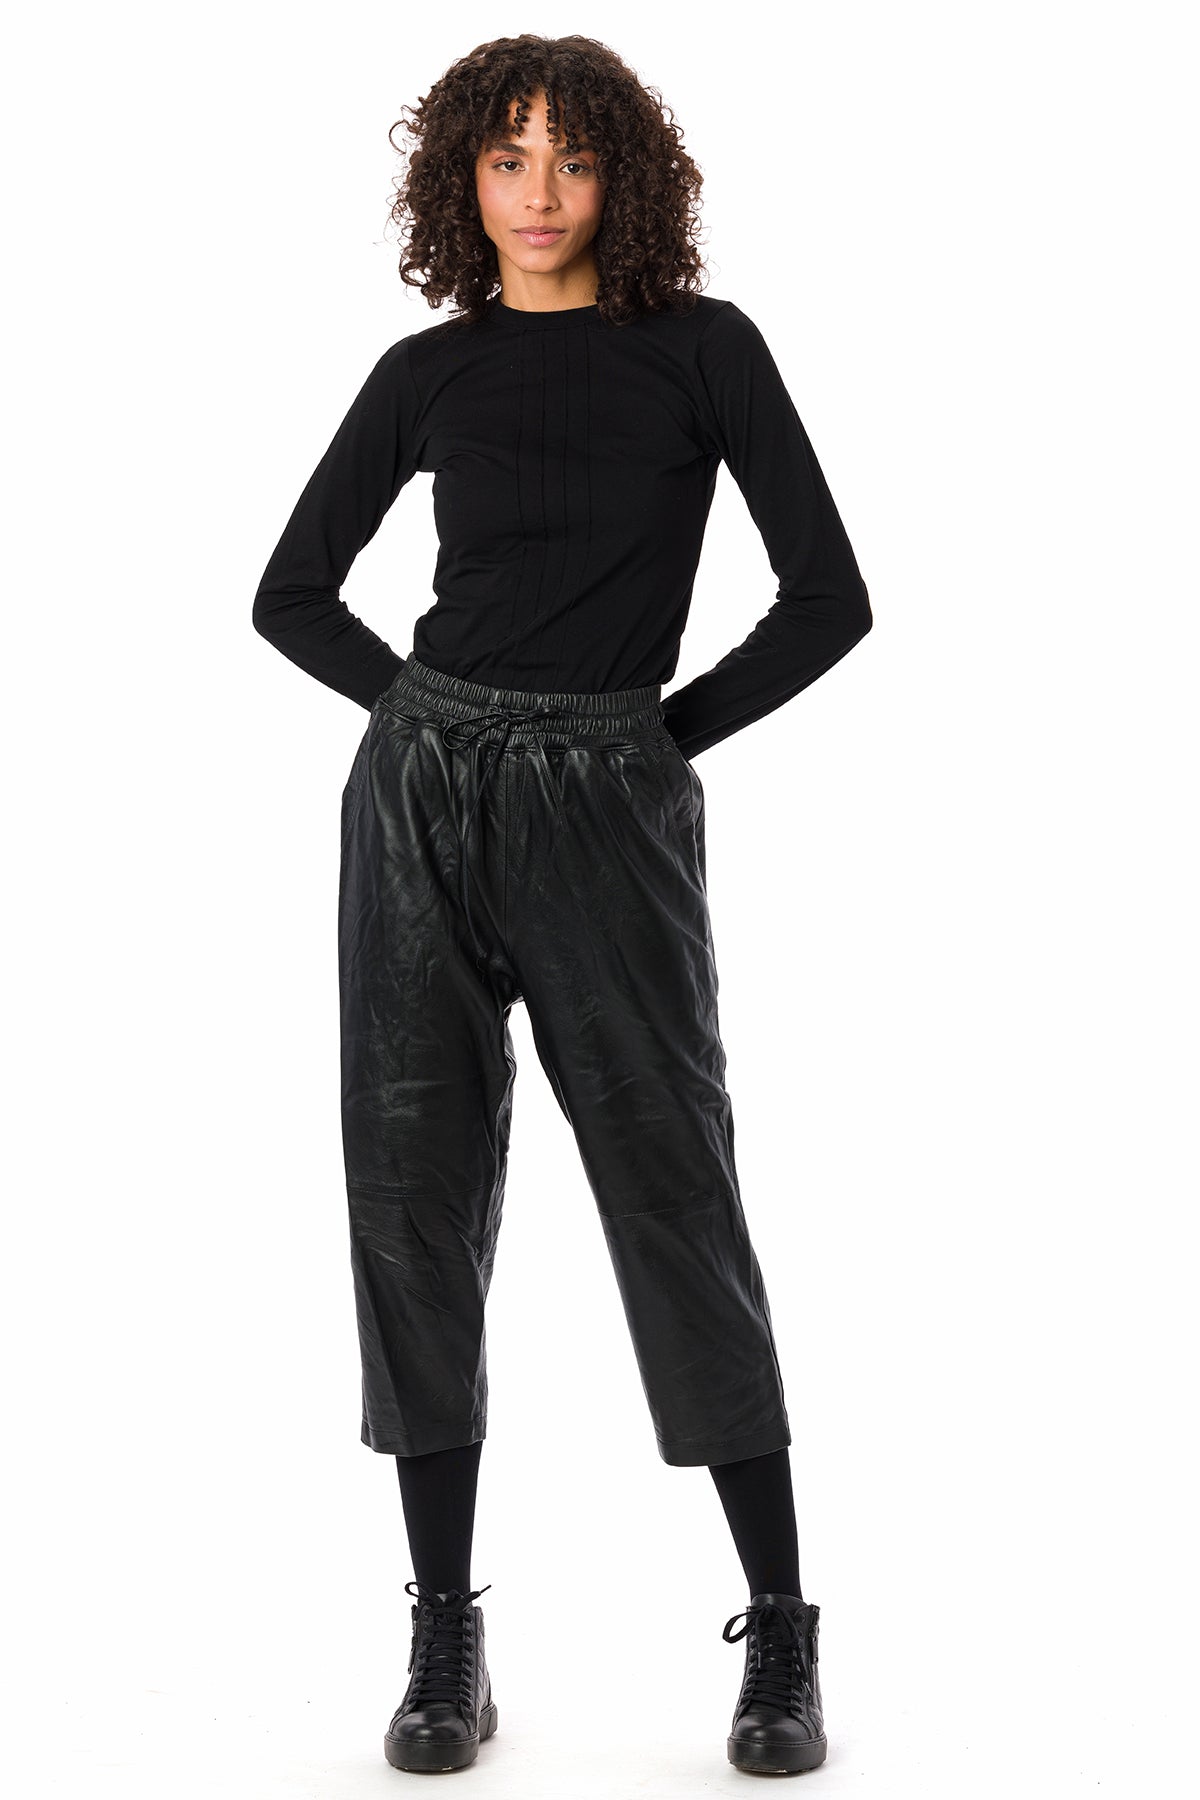 Suvi NYC Women's capri leather pants 100 % real Turkish leather lambskin. Leather cropped pants luxurious, high-end, trendy